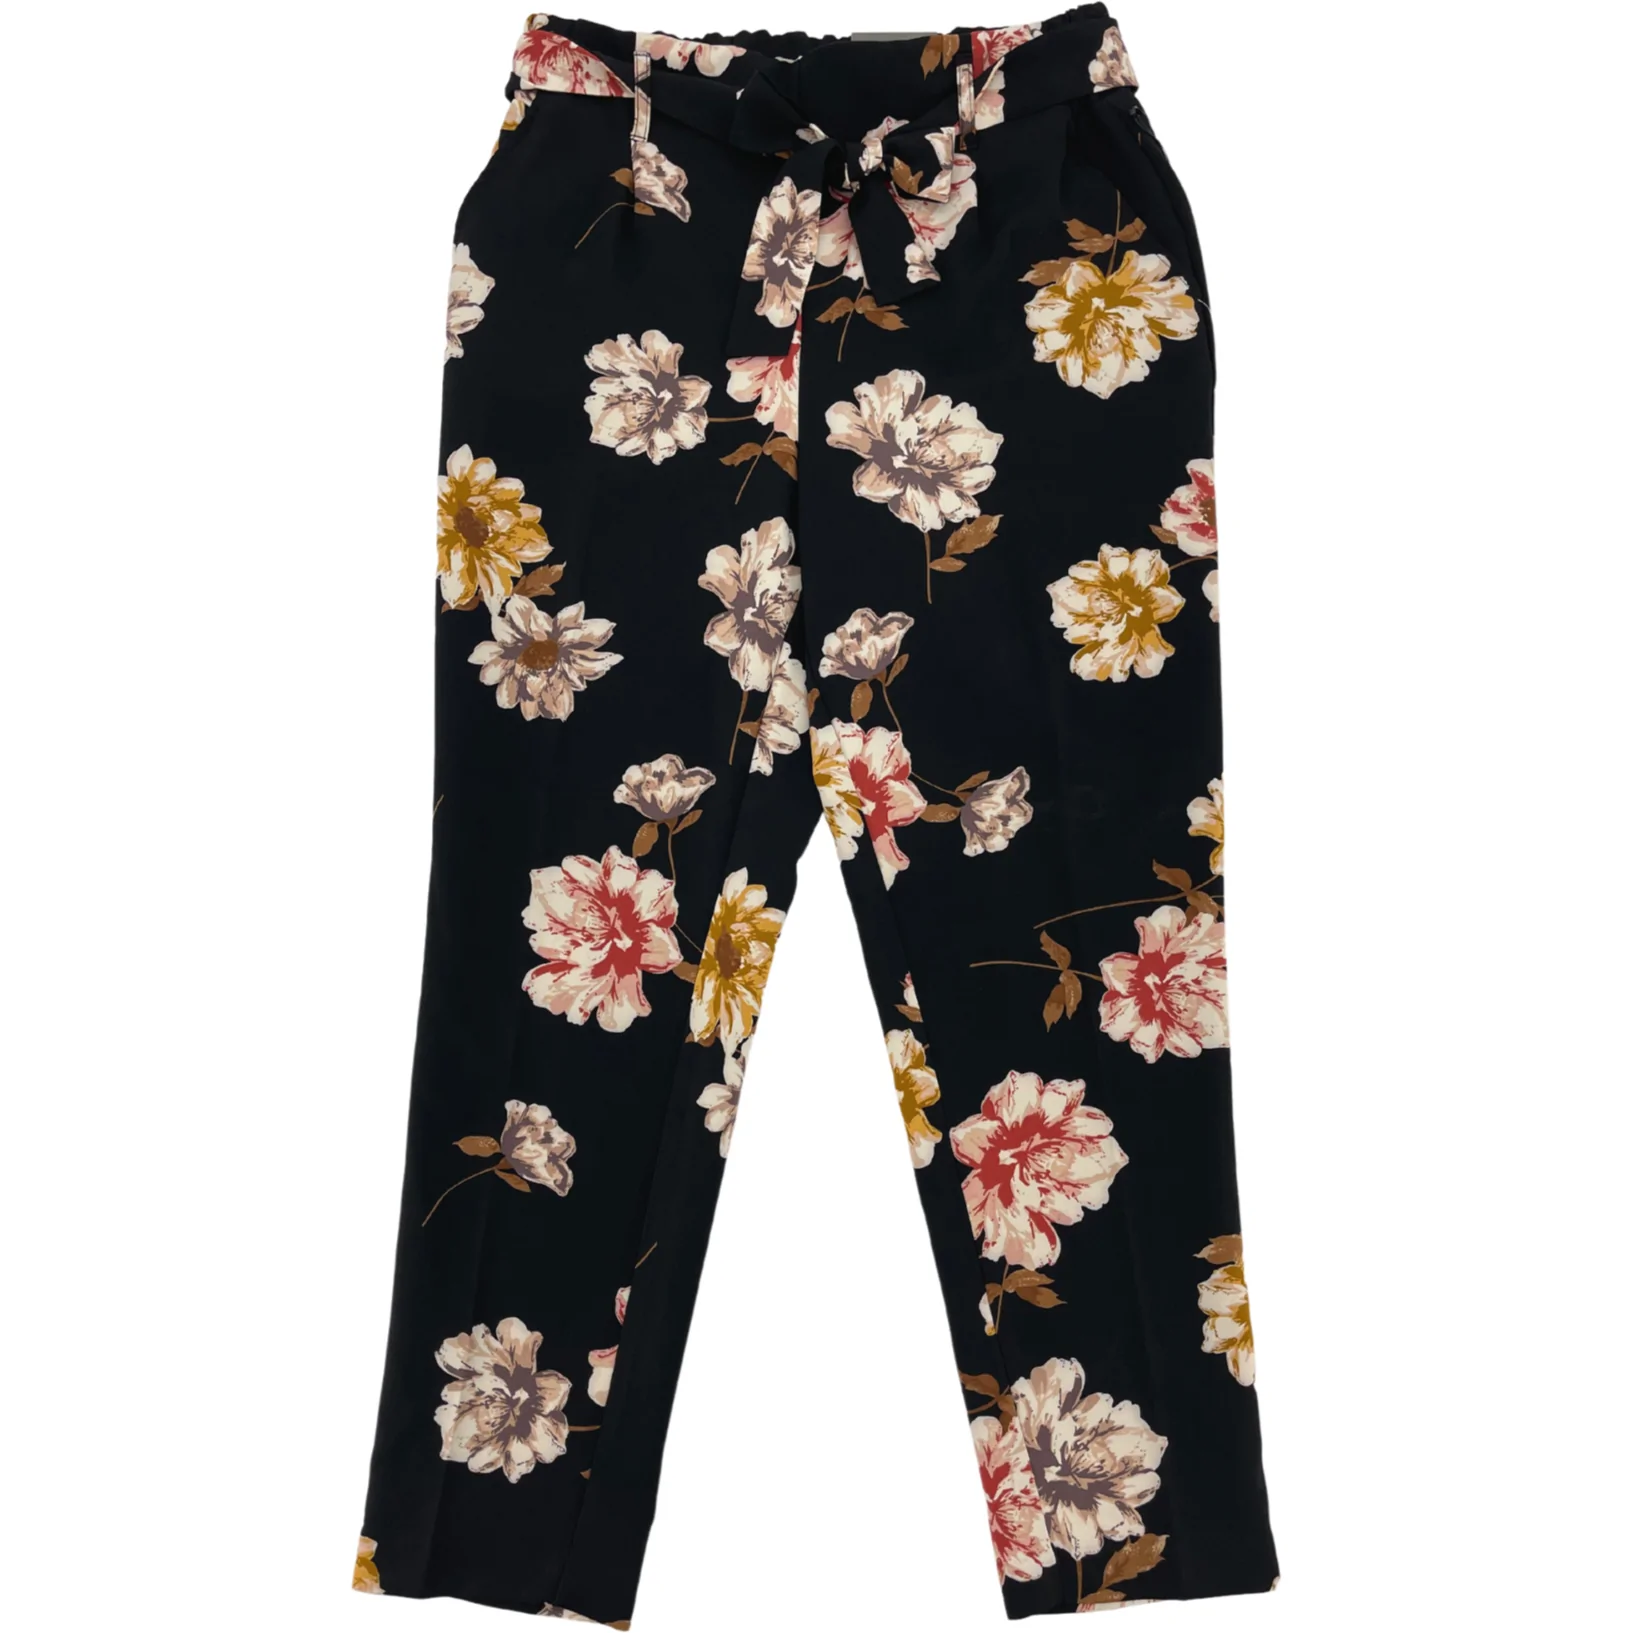 One by Chapter One Women’s Floral Pants / Size Small